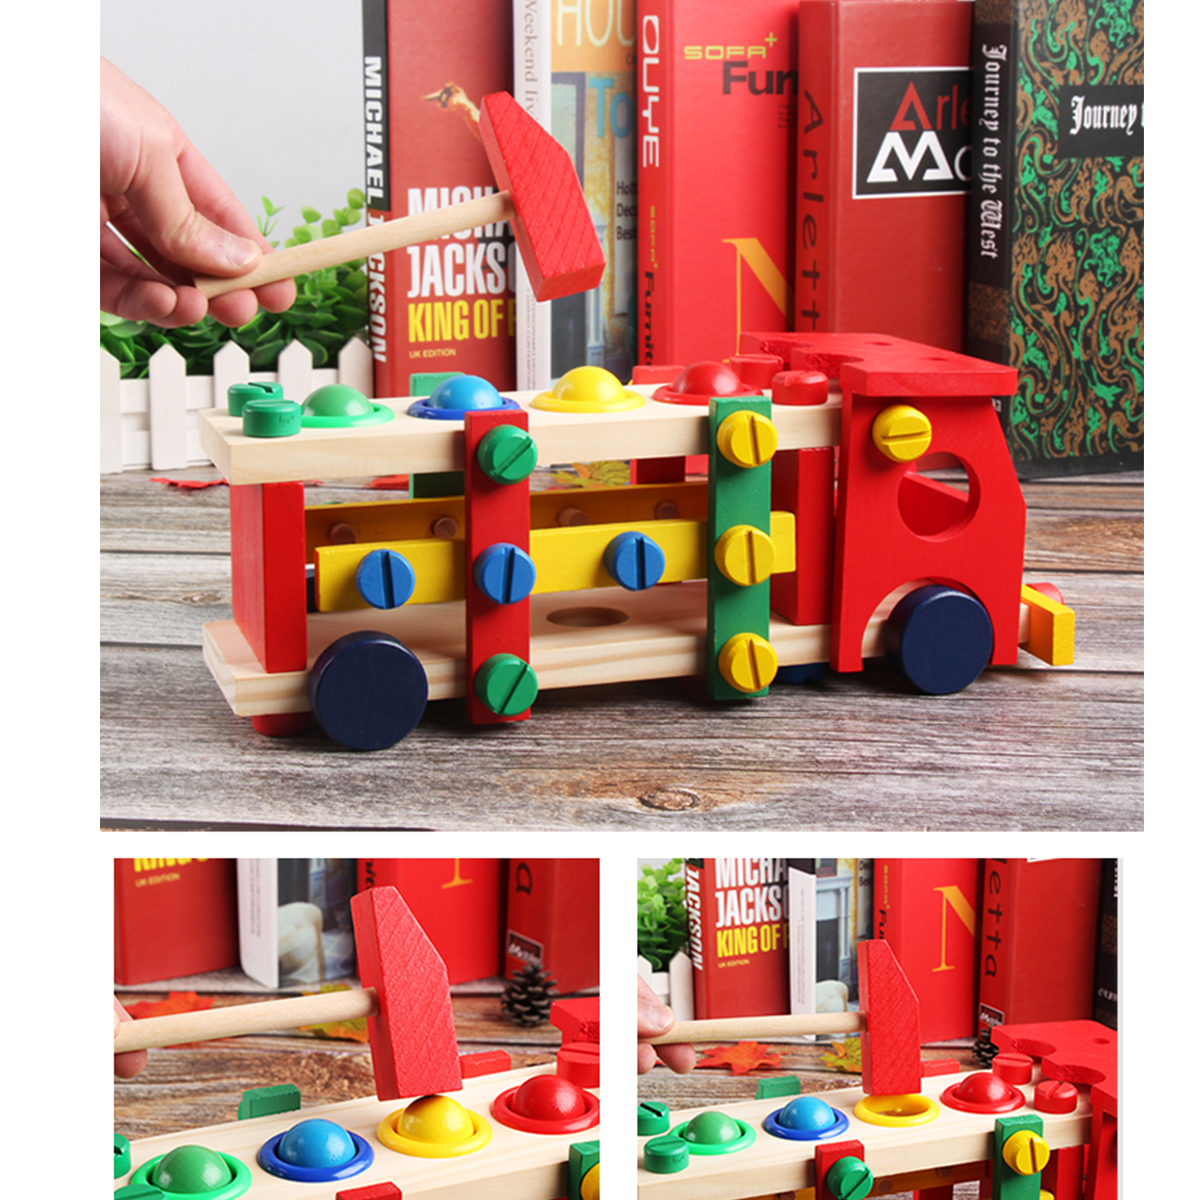 DIY-Educational-Toys-Kids-Exercise-Practical-Wooden-IQ-Game-Car-Assemble-Building-Gift-Training-Brai-1598139-10